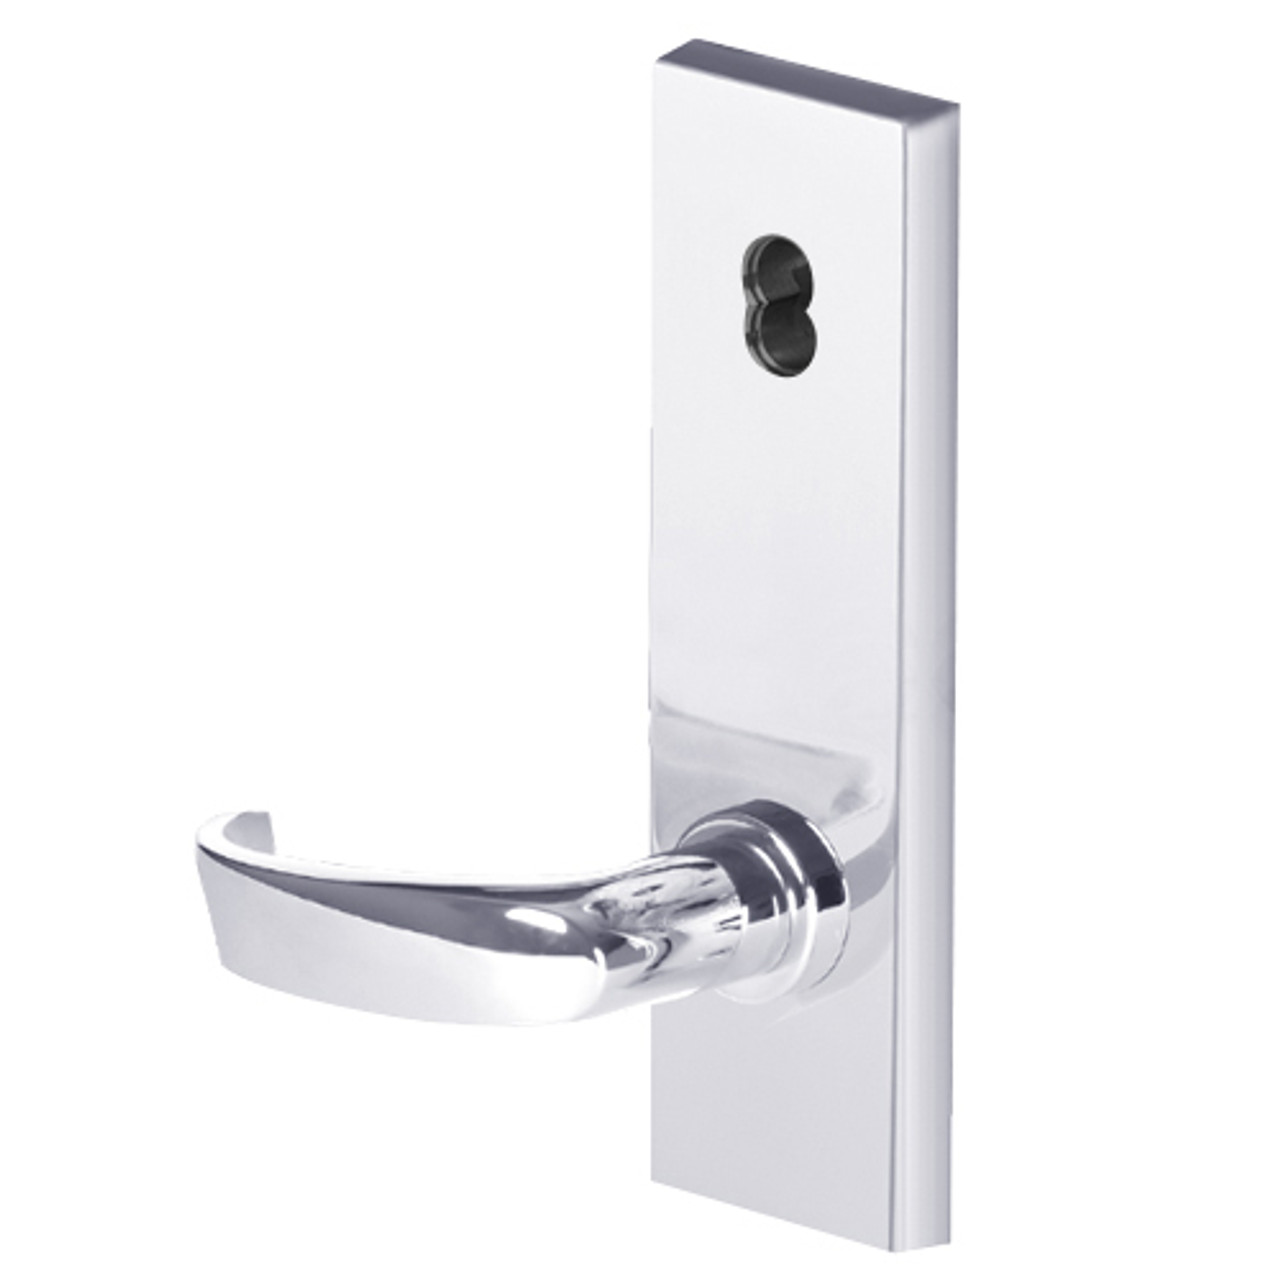 45HW7TWEL14N625 Best 40HW series Double Key Deadbolt Fail Safe Electromechanical Mortise Lever Lock with Curved w/ Return Style in Bright Chrome